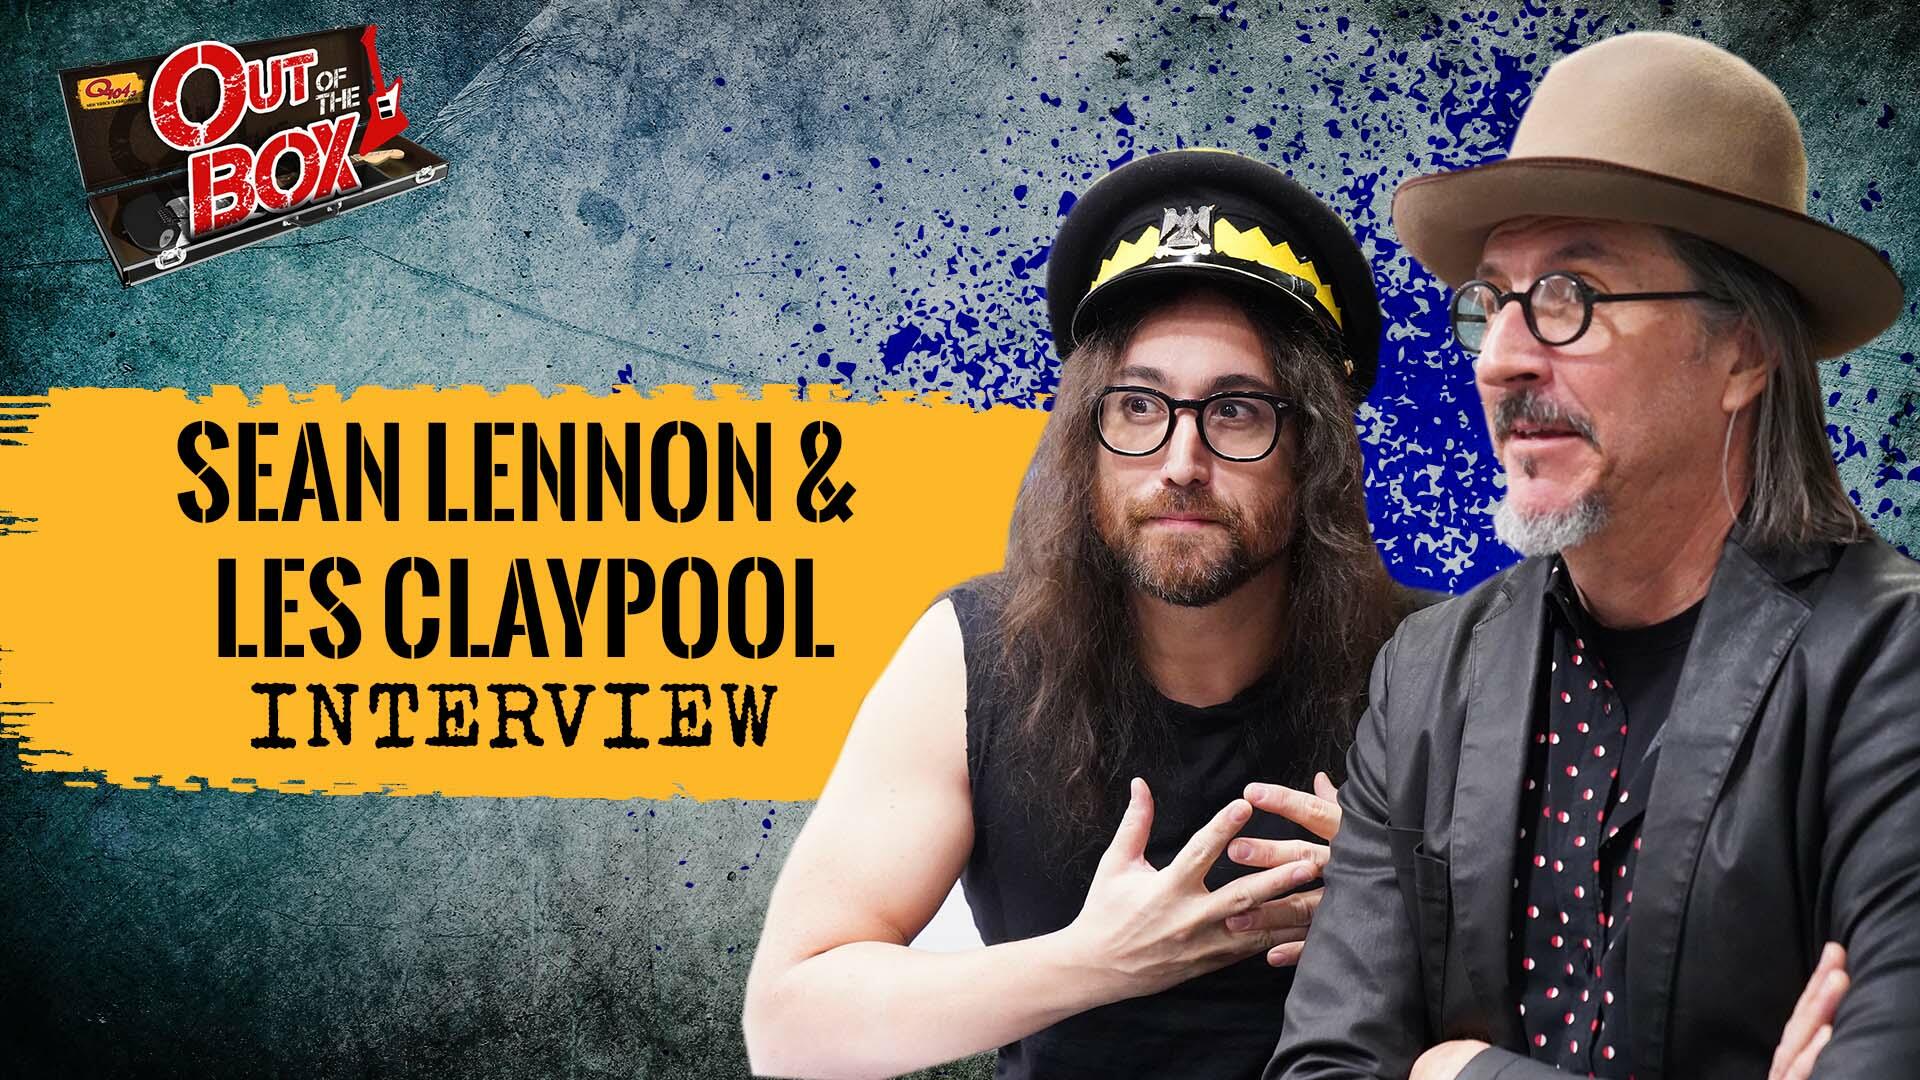 The claypool lennon. Группа the Claypool Lennon delirium. Claypool Lennon delirium South of reality. The Claypool Lennon delirium Википедия. Colonel les Claypool's Fearless Flying Frog Brigade Band.